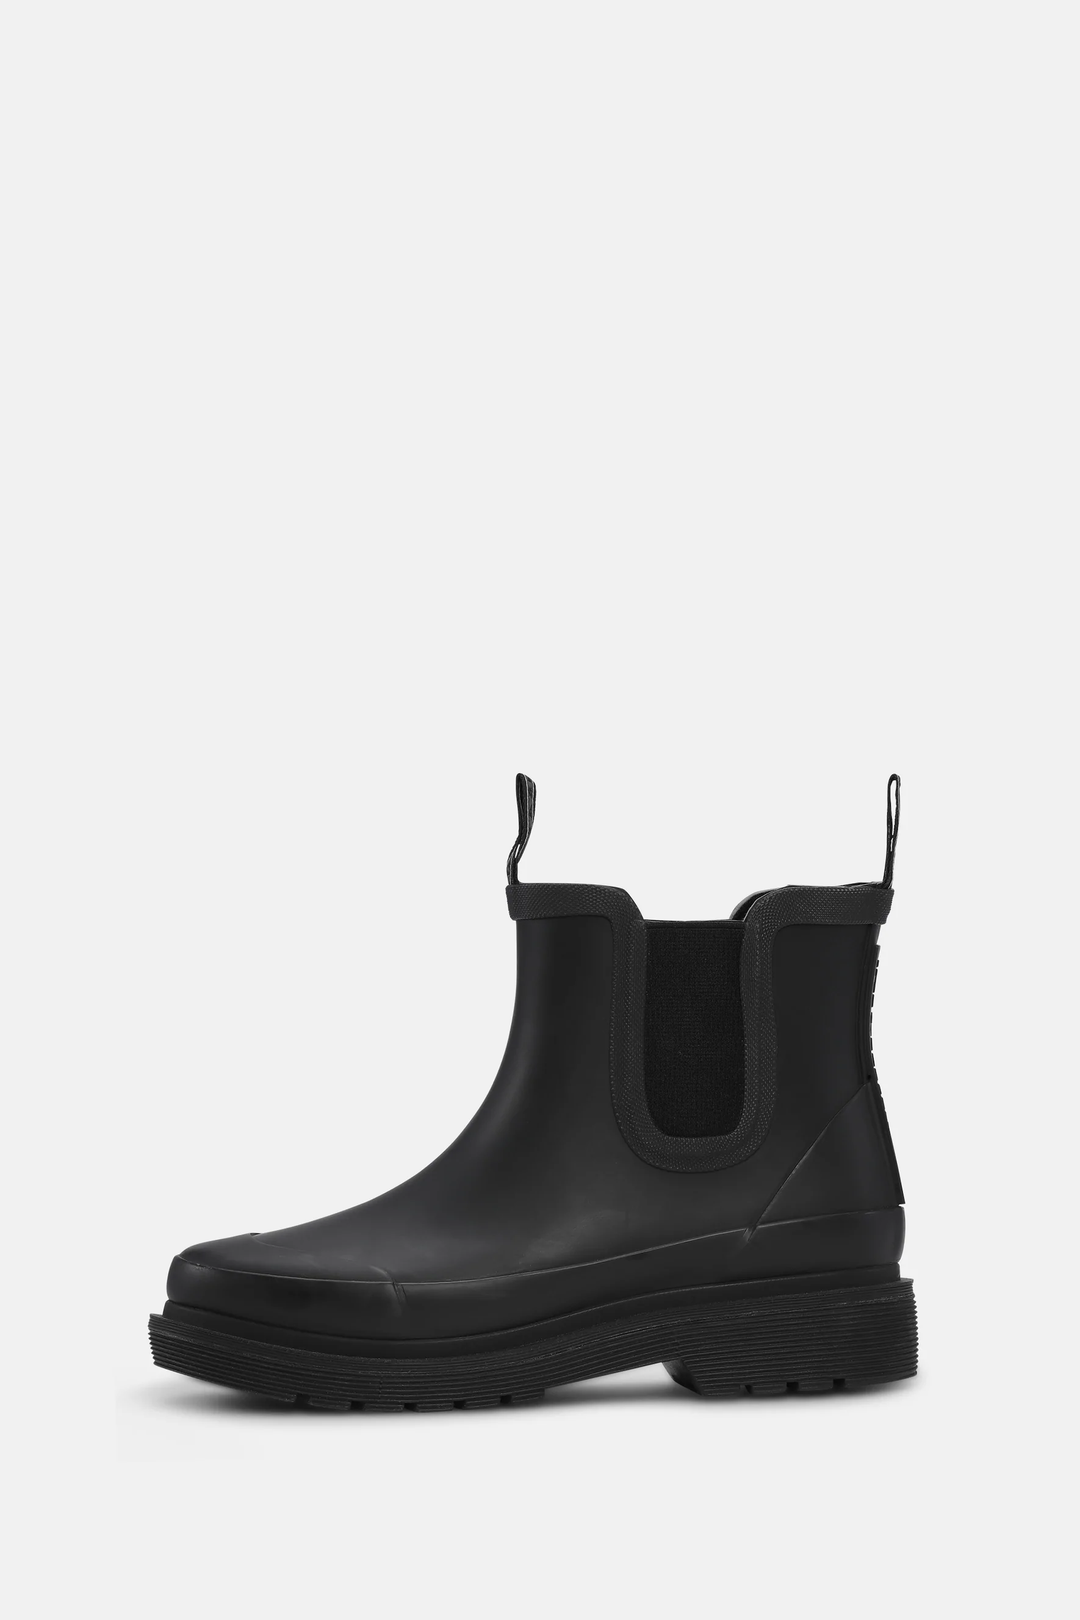 Ilse Jacobsen - Ankle Rubber Boots in Black